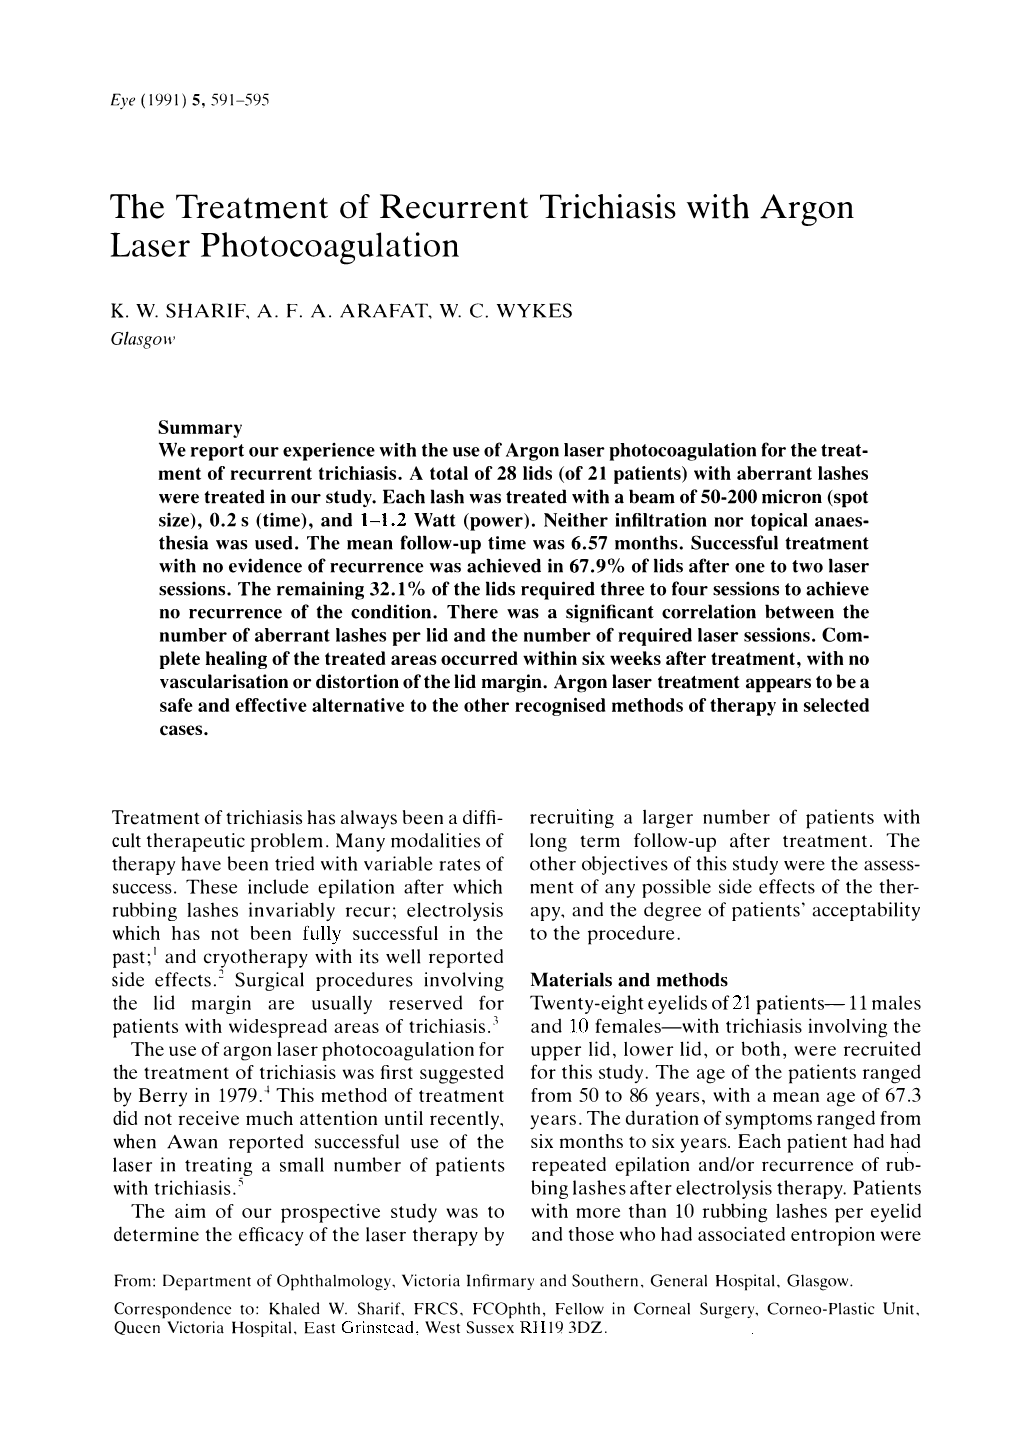 The Treatment of Recurrent Trichiasis with Argon Laser Photocoagulation